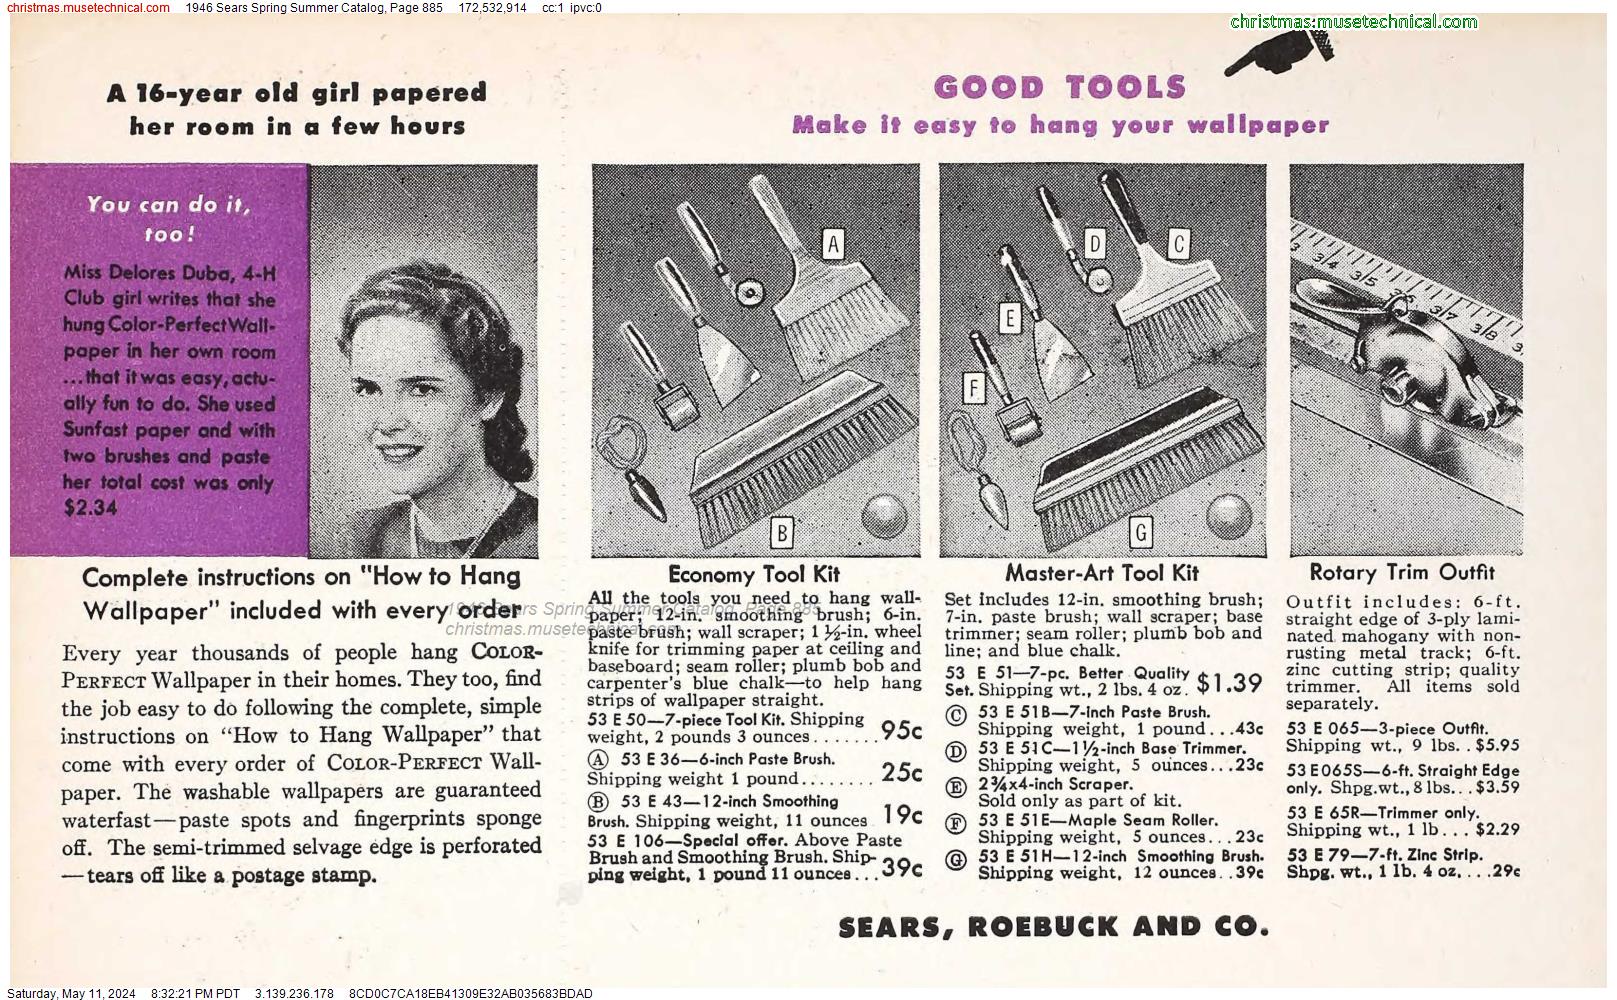 1946 Sears Spring Summer Catalog, Page 885